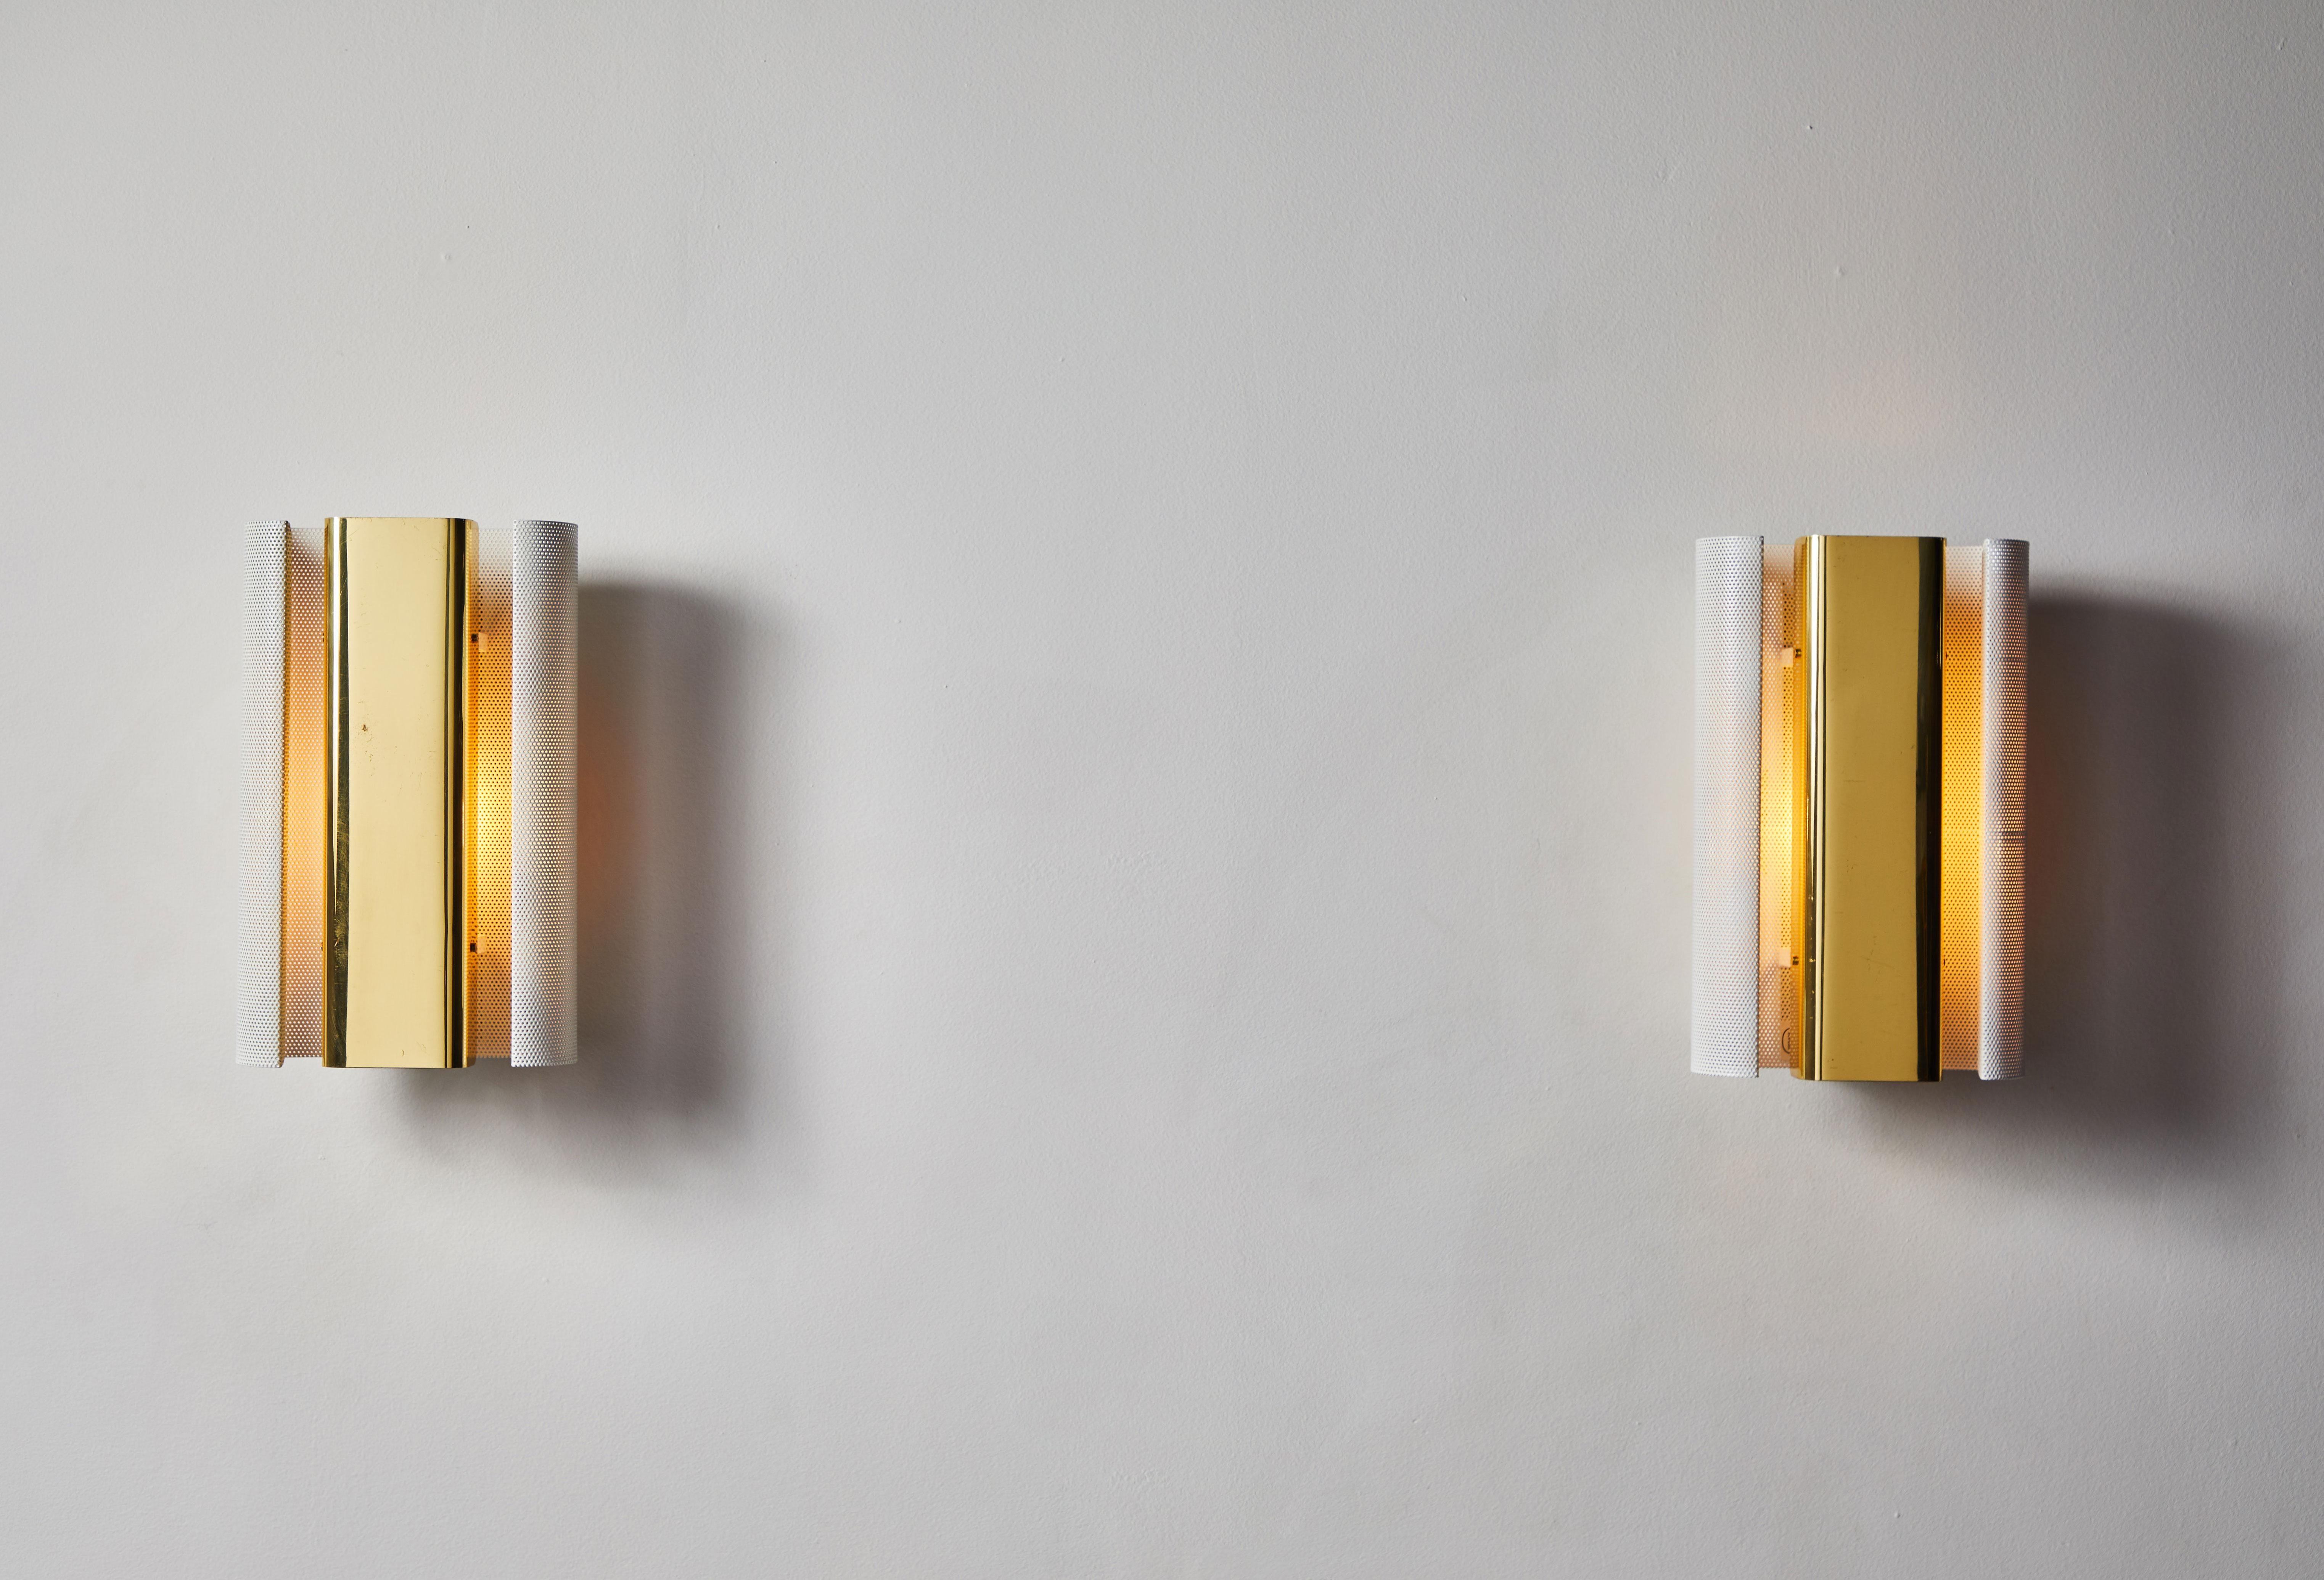 Two pair of sconces by Hans-Agne Jakobsson. Designed and manufactured in Sweden, circa 1970s. Perforated, enameled metal and brass. Deadstock, never used. Rewired for US junction boxes. Each light takes one E26 40w maximum bulb. Sold as pairs only.